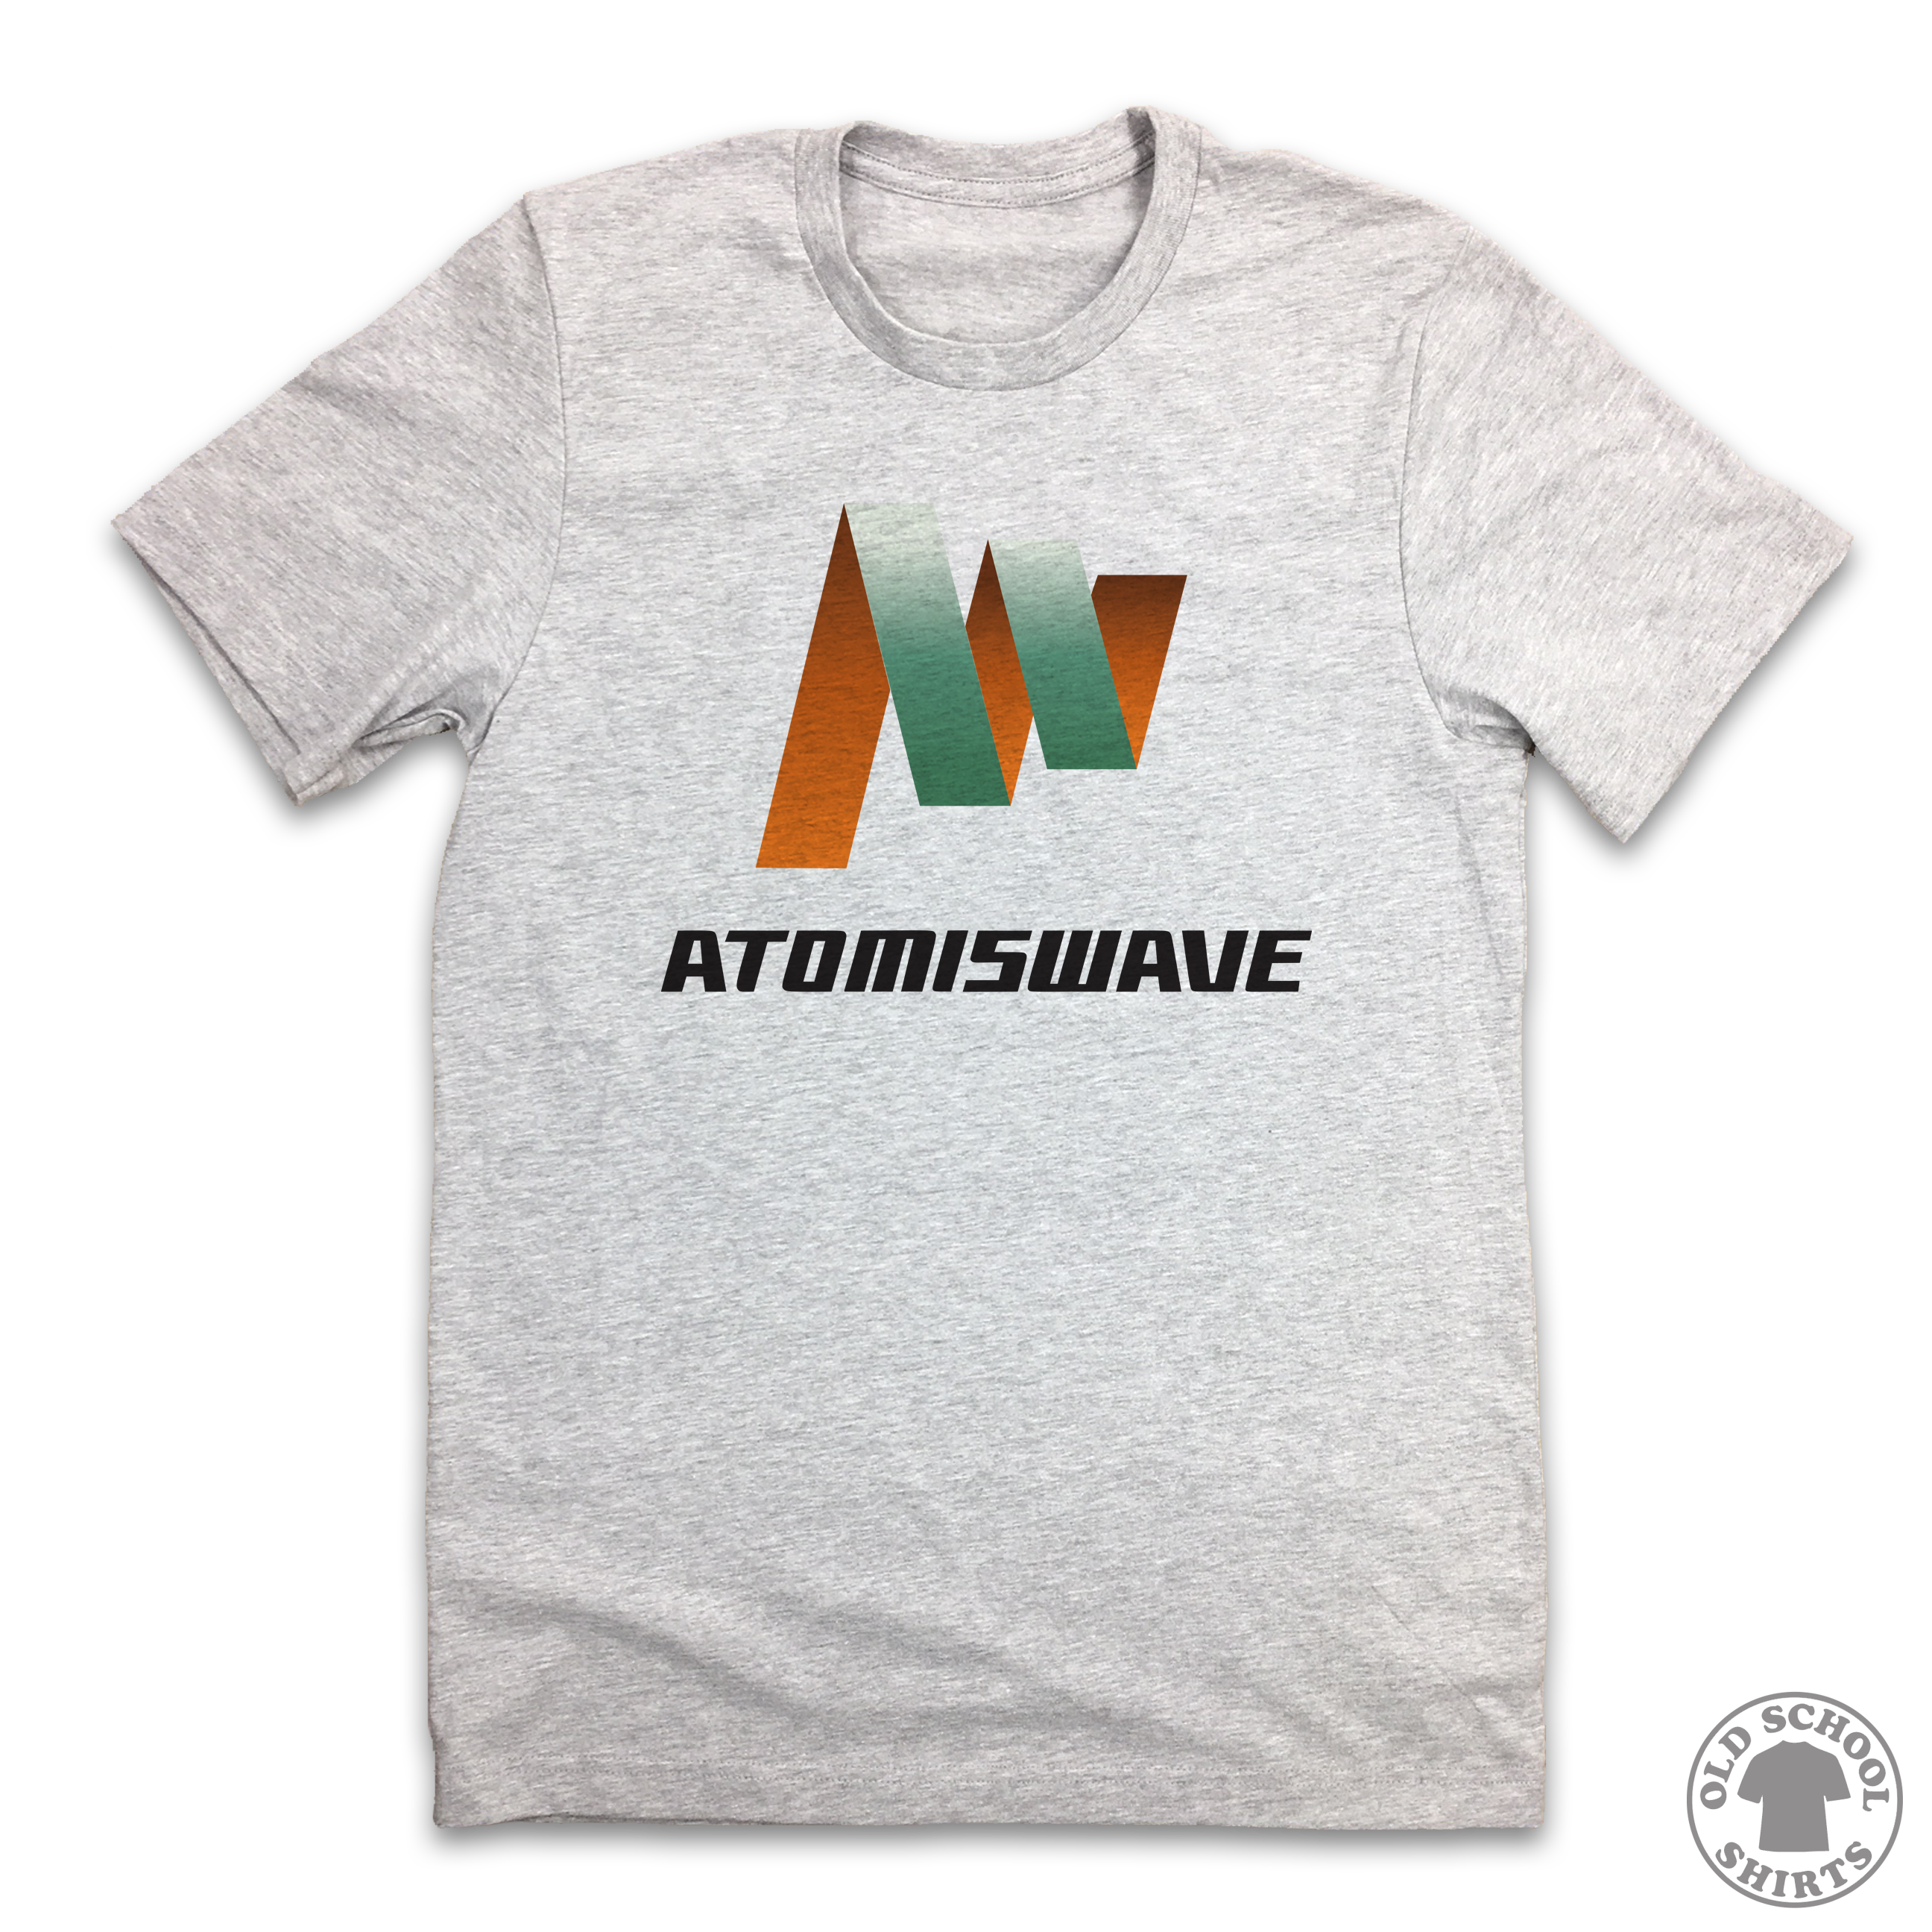 Atomiswave - Old School Shirts- Retro Sports T Shirts